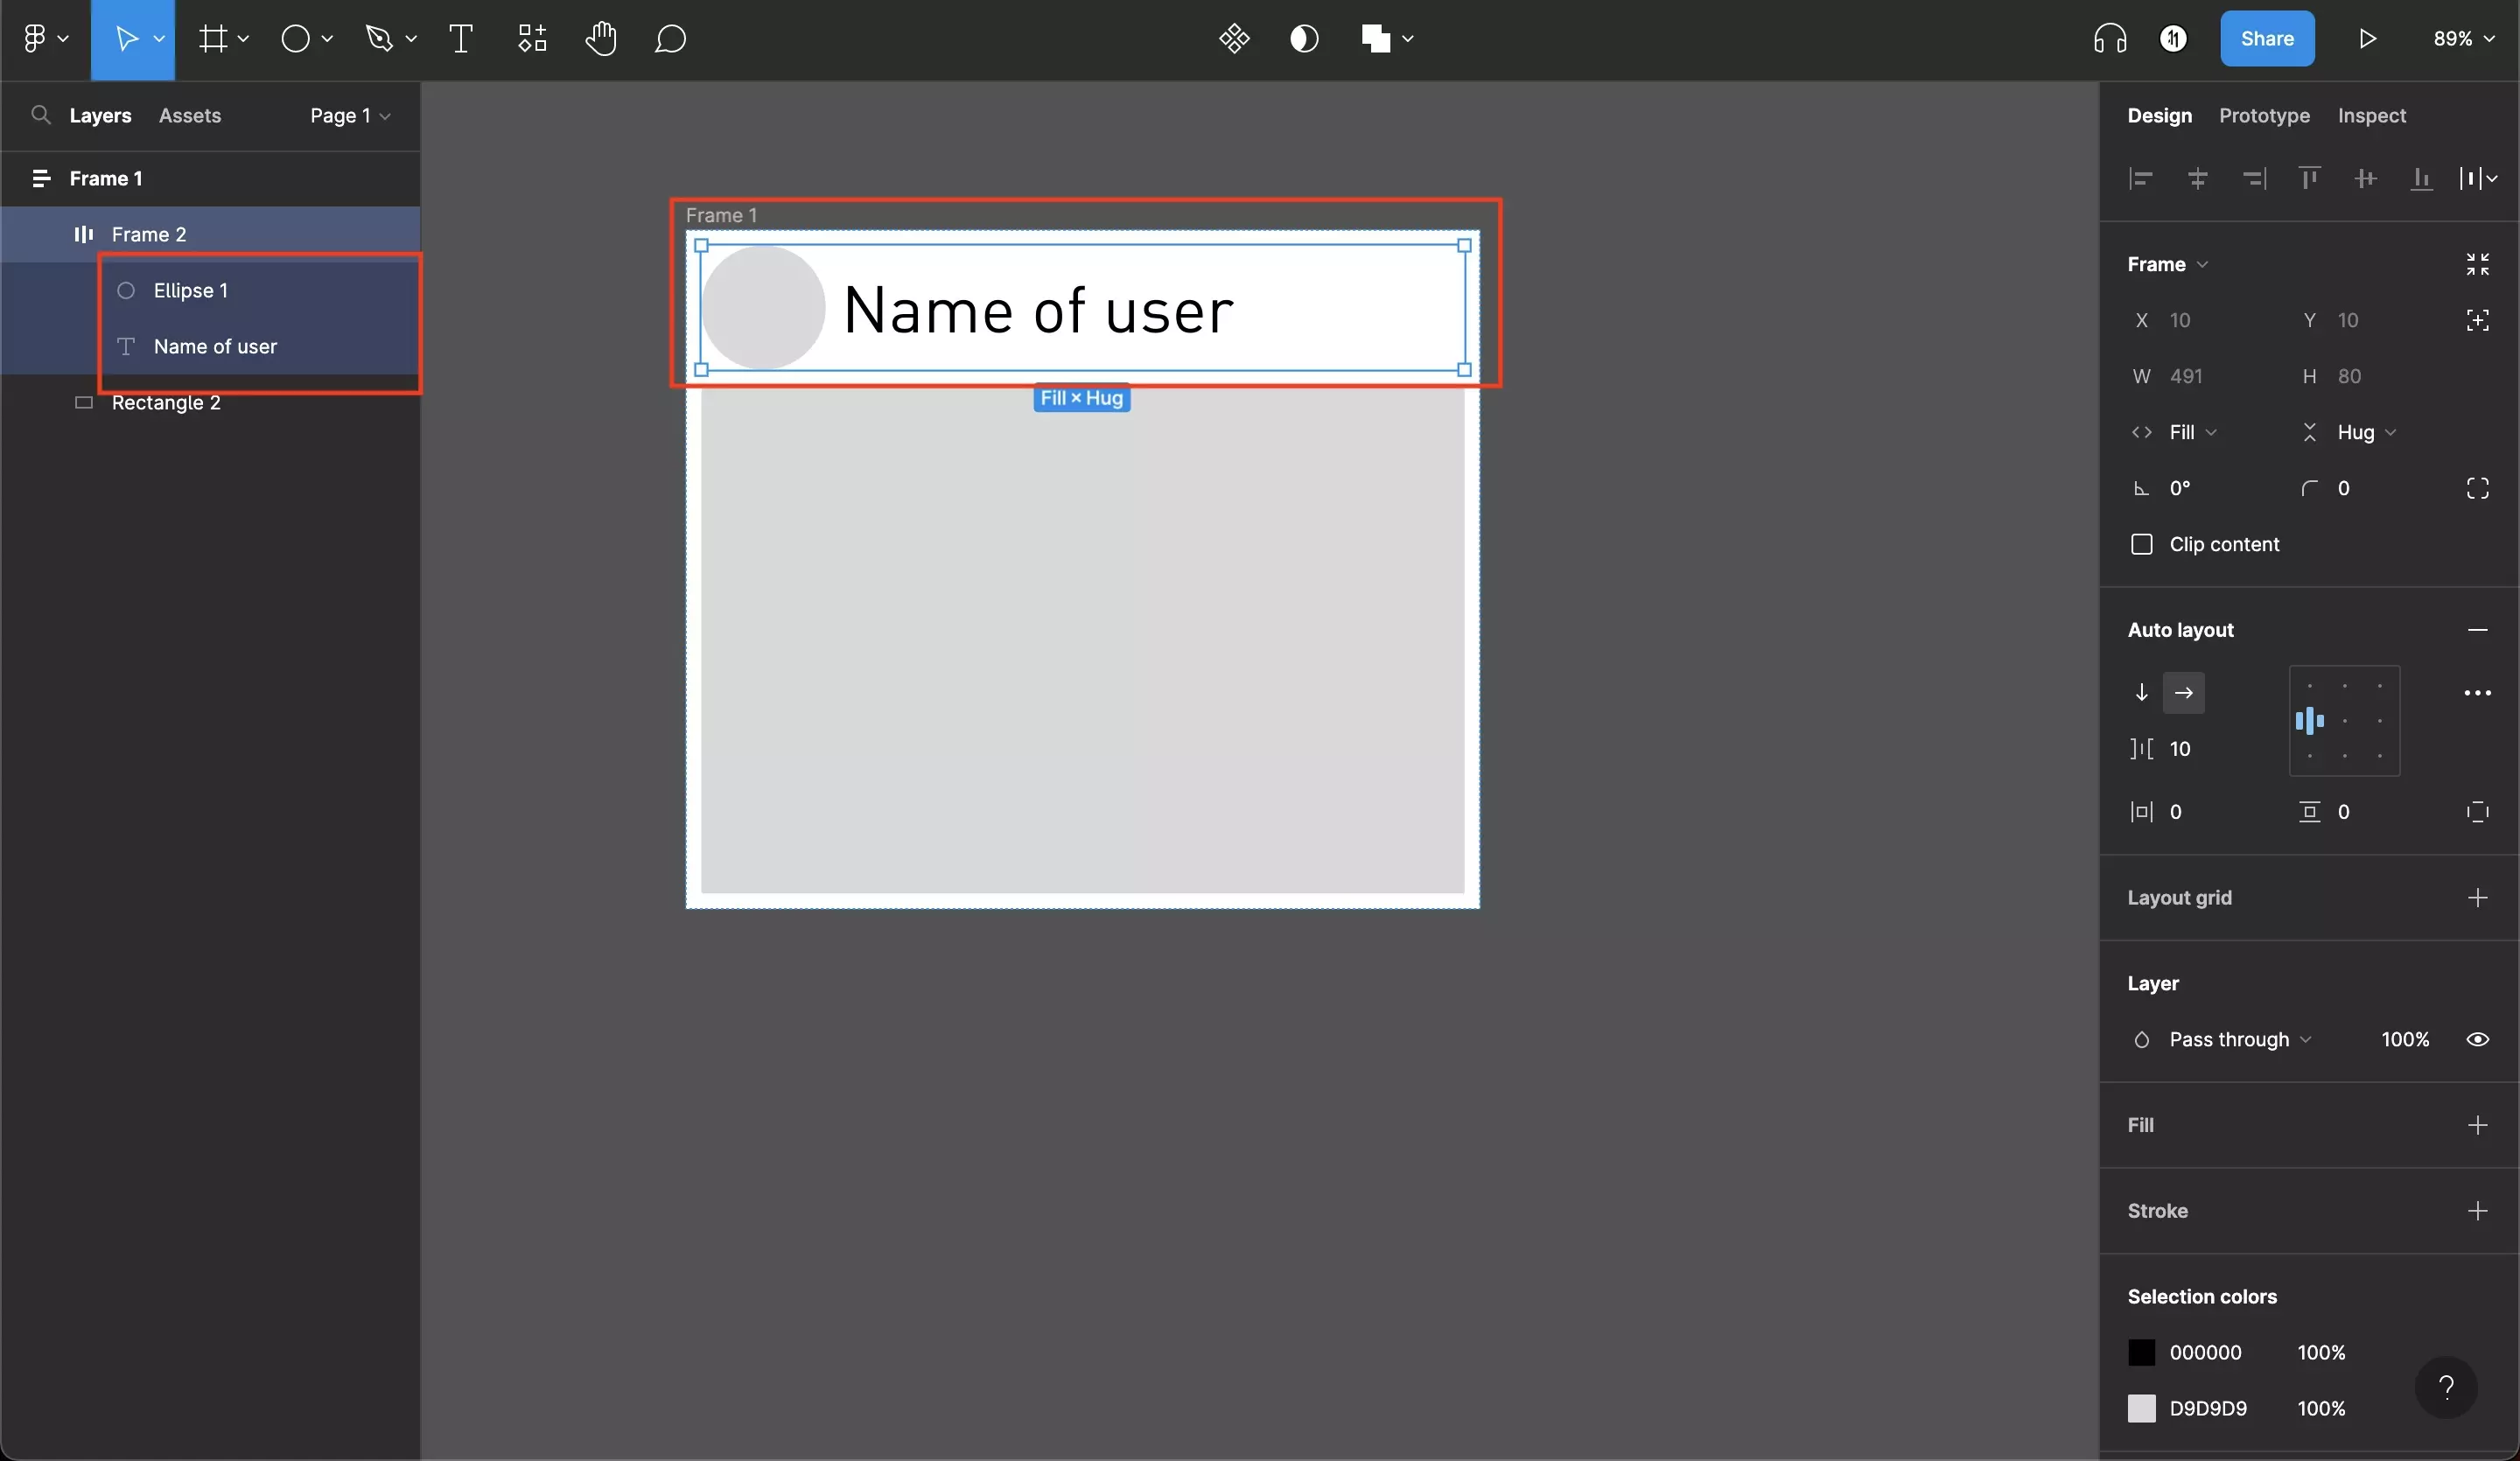 A screenshot of Figma with the top section layout completed.